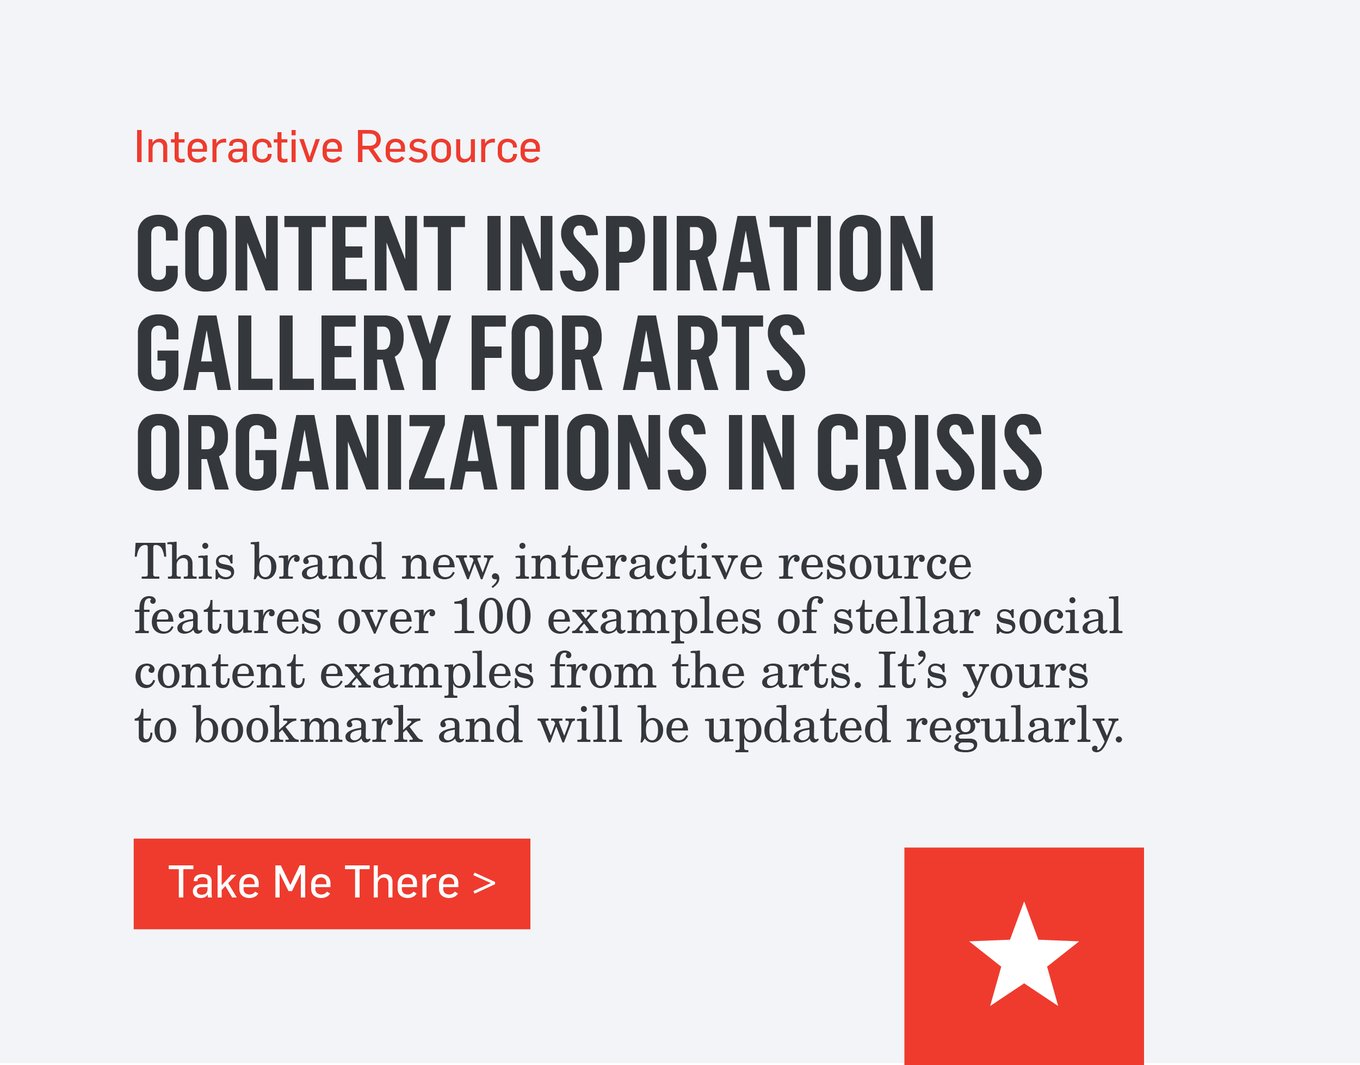 Interactive Resource - CONTENT INSPIRATION GALLERY FOR ARTS ORGANIZATIONS IN CRISIS - This brand new, interactive resource features over 100 examples of stellar social content examples from the arts. It's yours to bookmark and will be updated regularly and will help you create meaningful and authentic content during this uncertain time. >>>Take Me There>>>